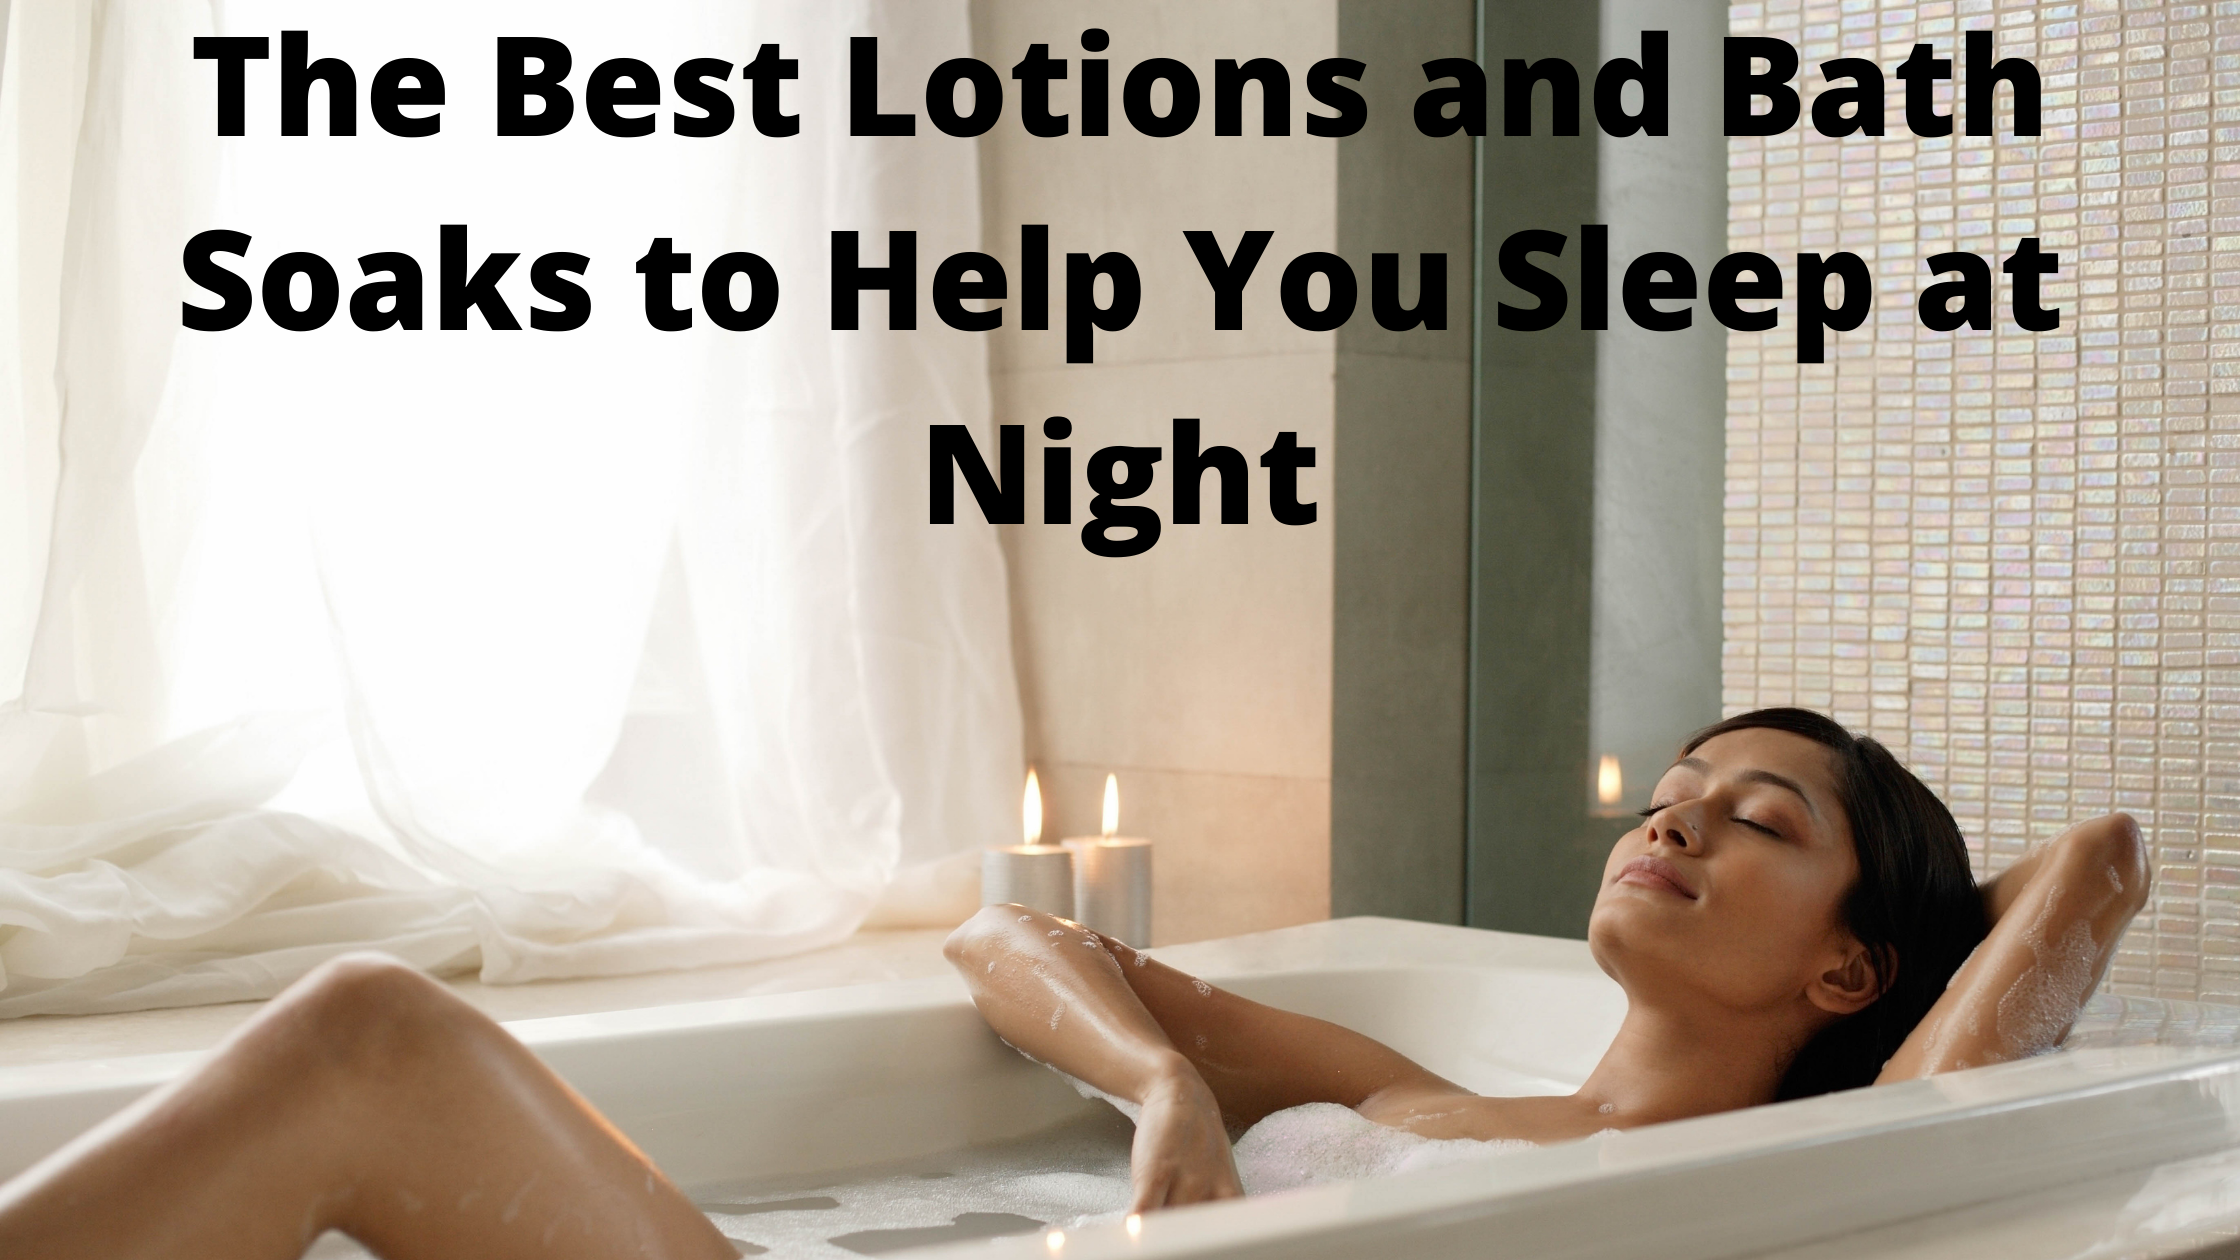 The Best Lotions and Bath Soaks to Help You Sleep at Night